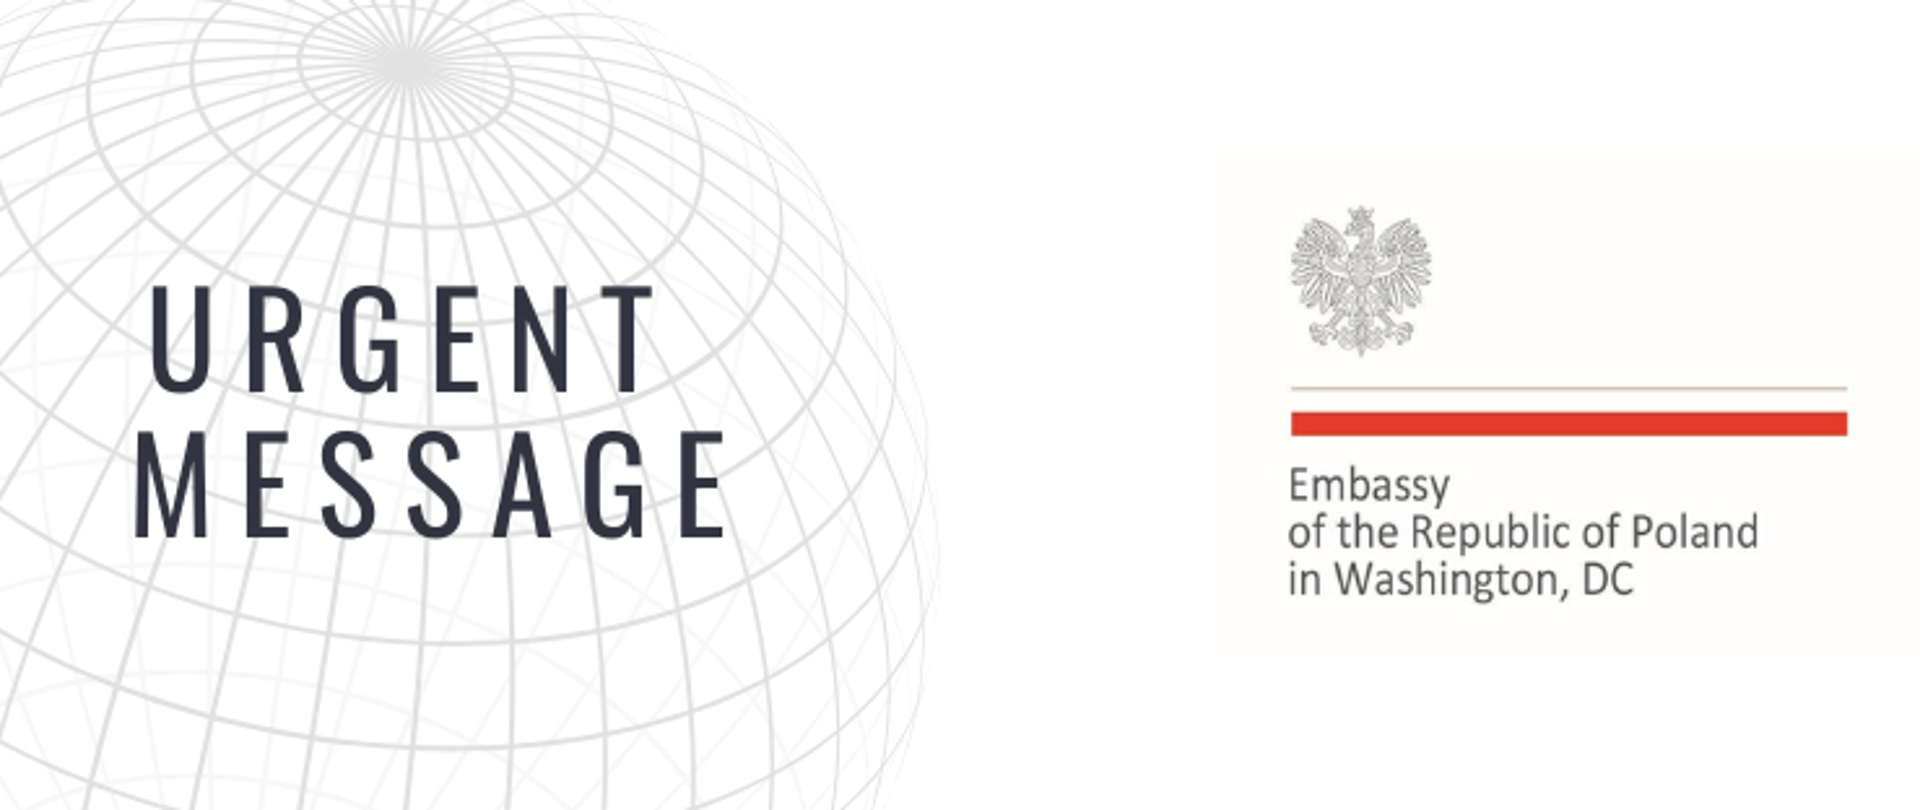 Logo of the official announcement of the Embassy of Poland in Washington, DC